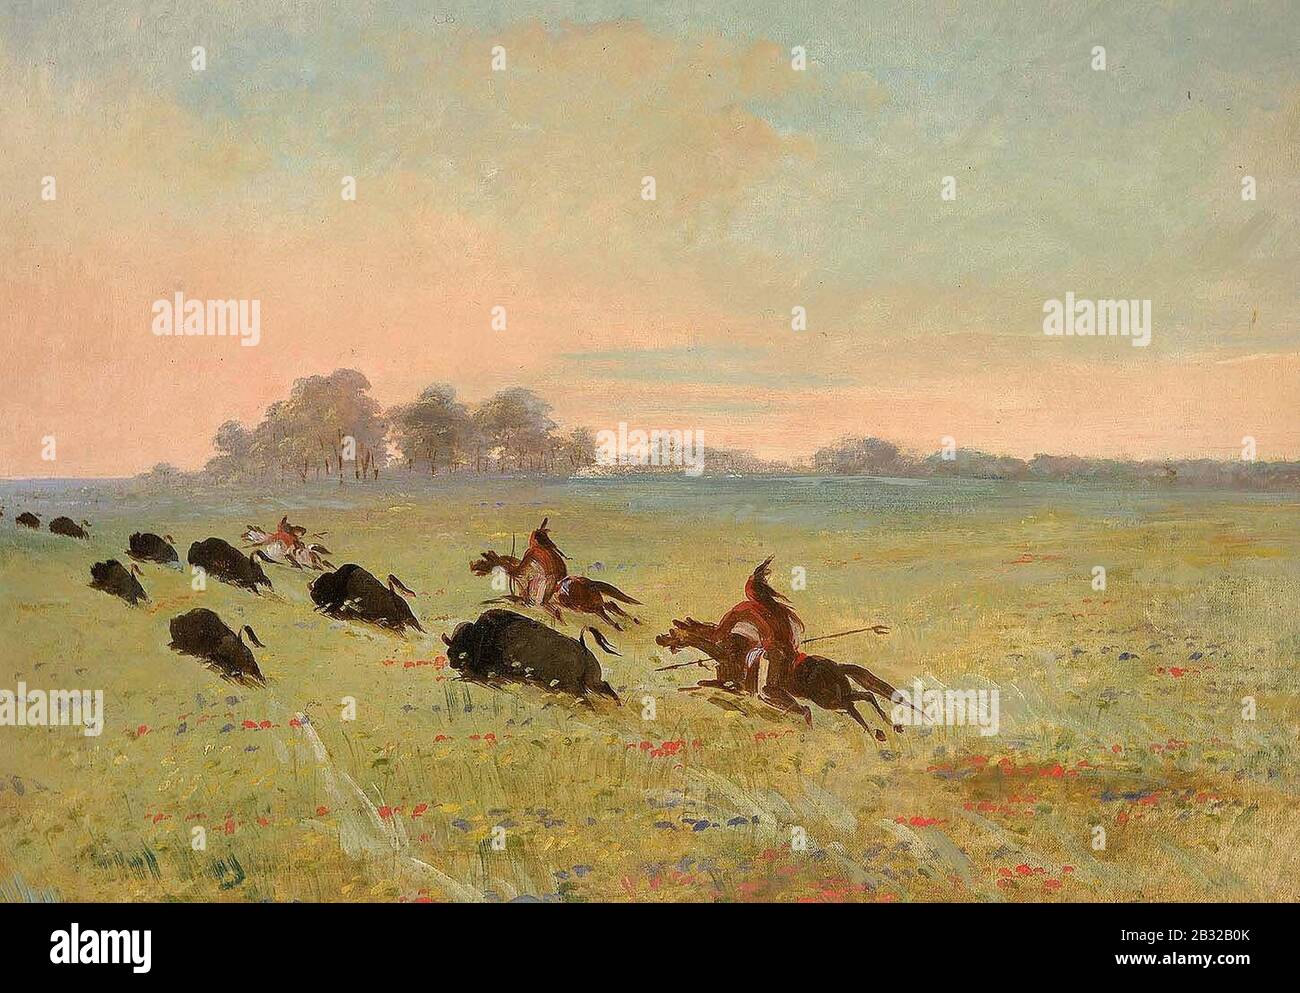 George Catlin - Comanche Indians Chasing Buffalo Stock Photo